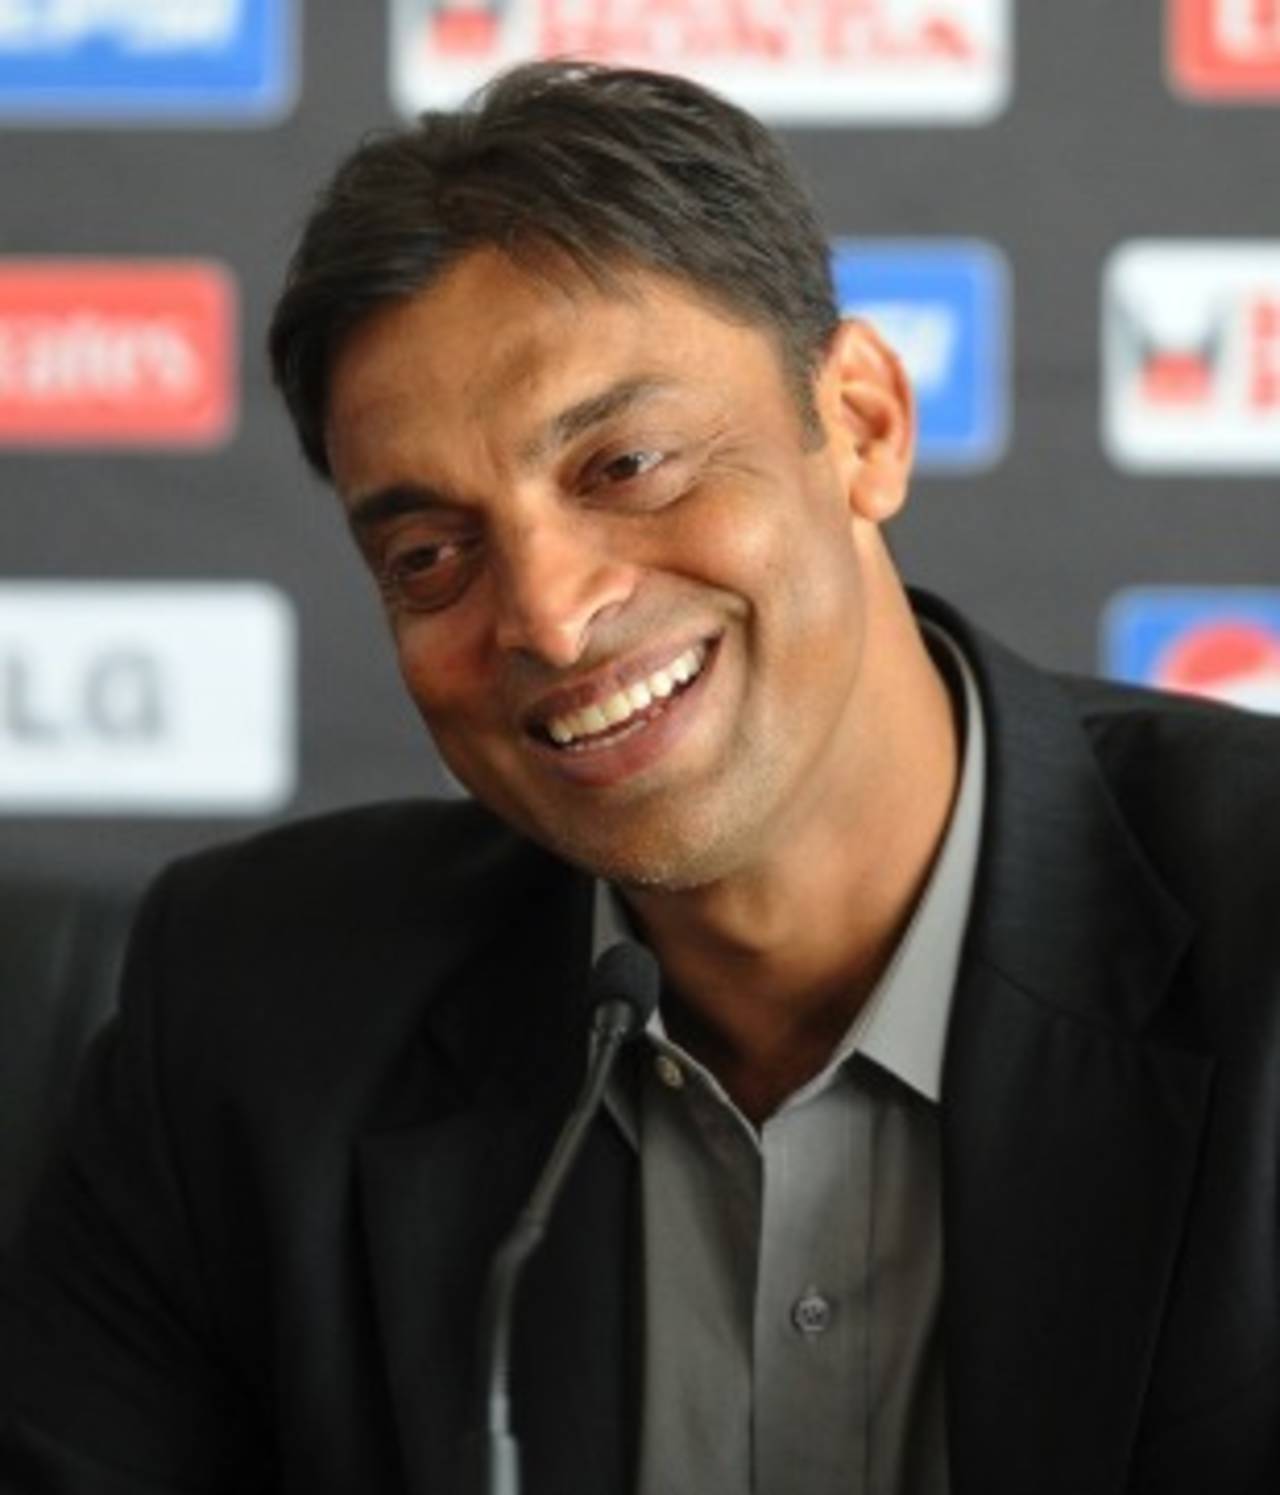 Shoaib Akhtar smiles while announcing his retirement, Colombo, March 17, 2011